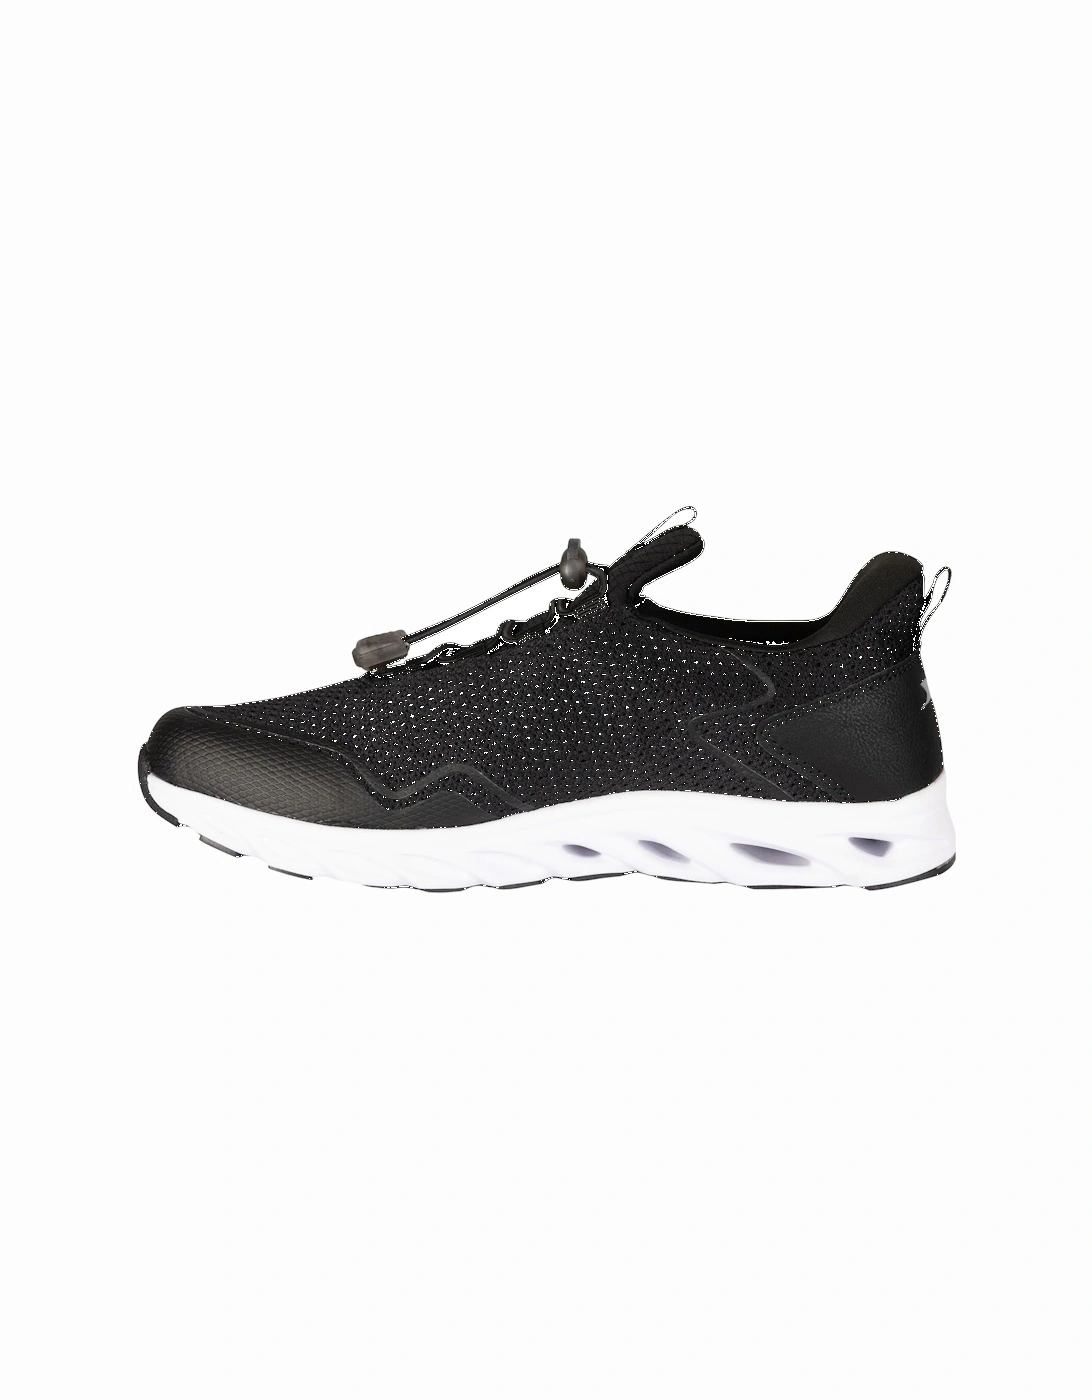 Unisex Adult Kai Water Trainers